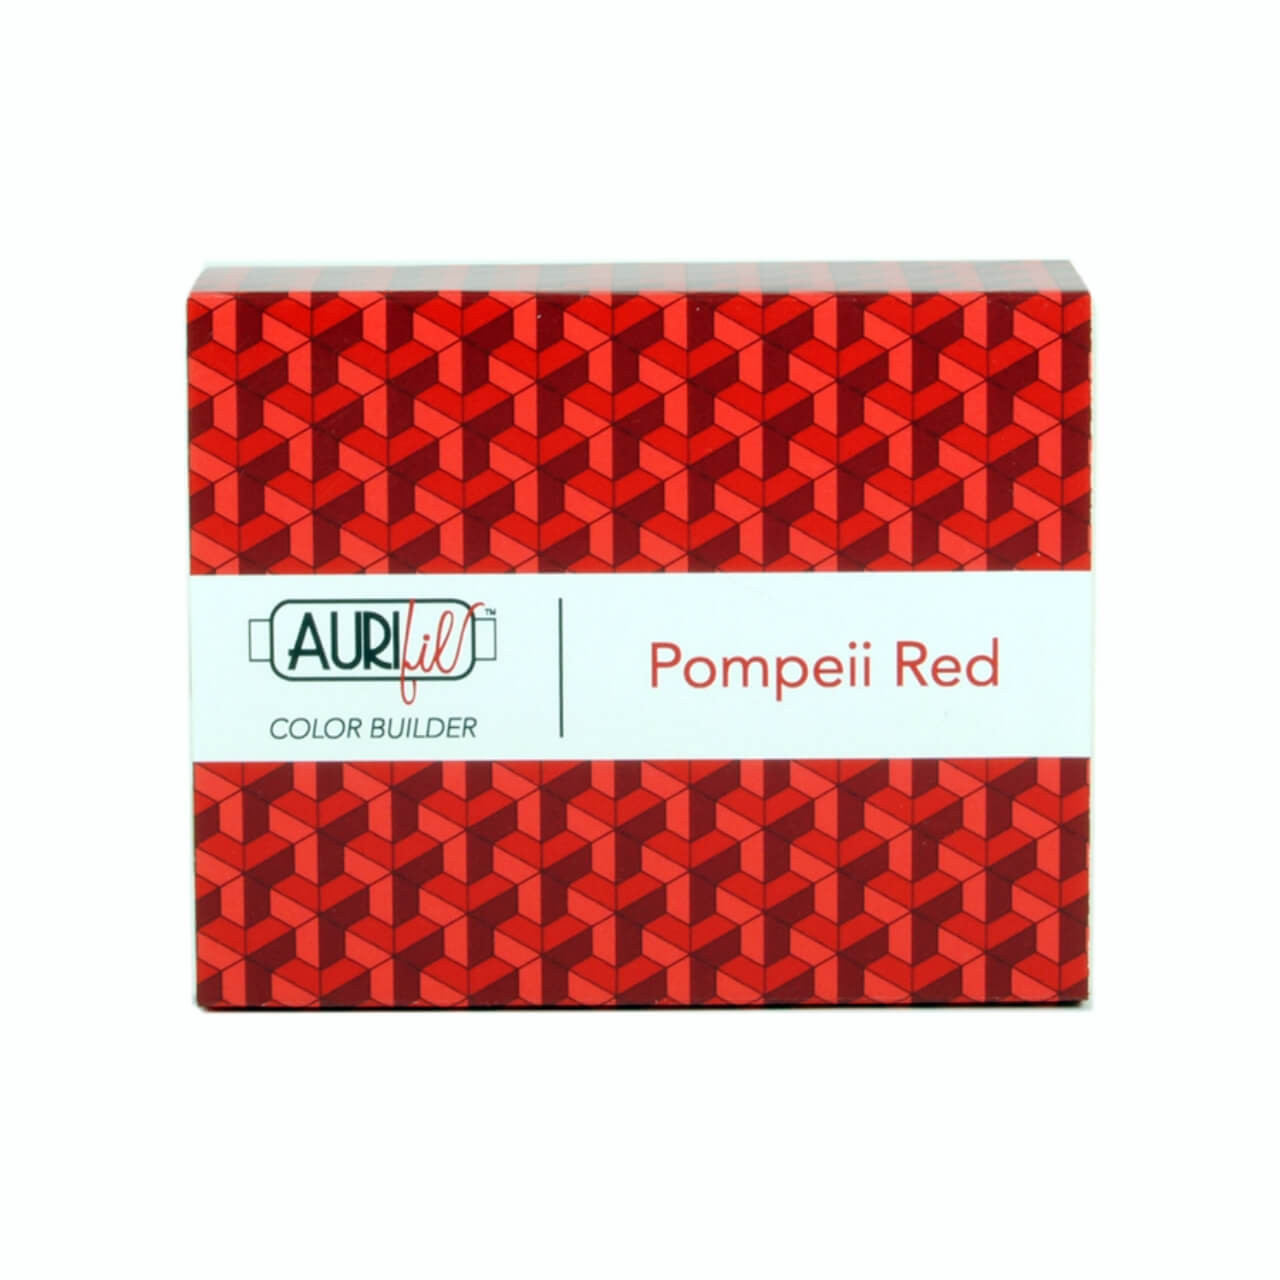 Packaging for Aurifil's Pompeii Red Color Builder, featuring a vibrant red geometric pattern with the Aurifil logo and "Pompeii Red" text on the label.